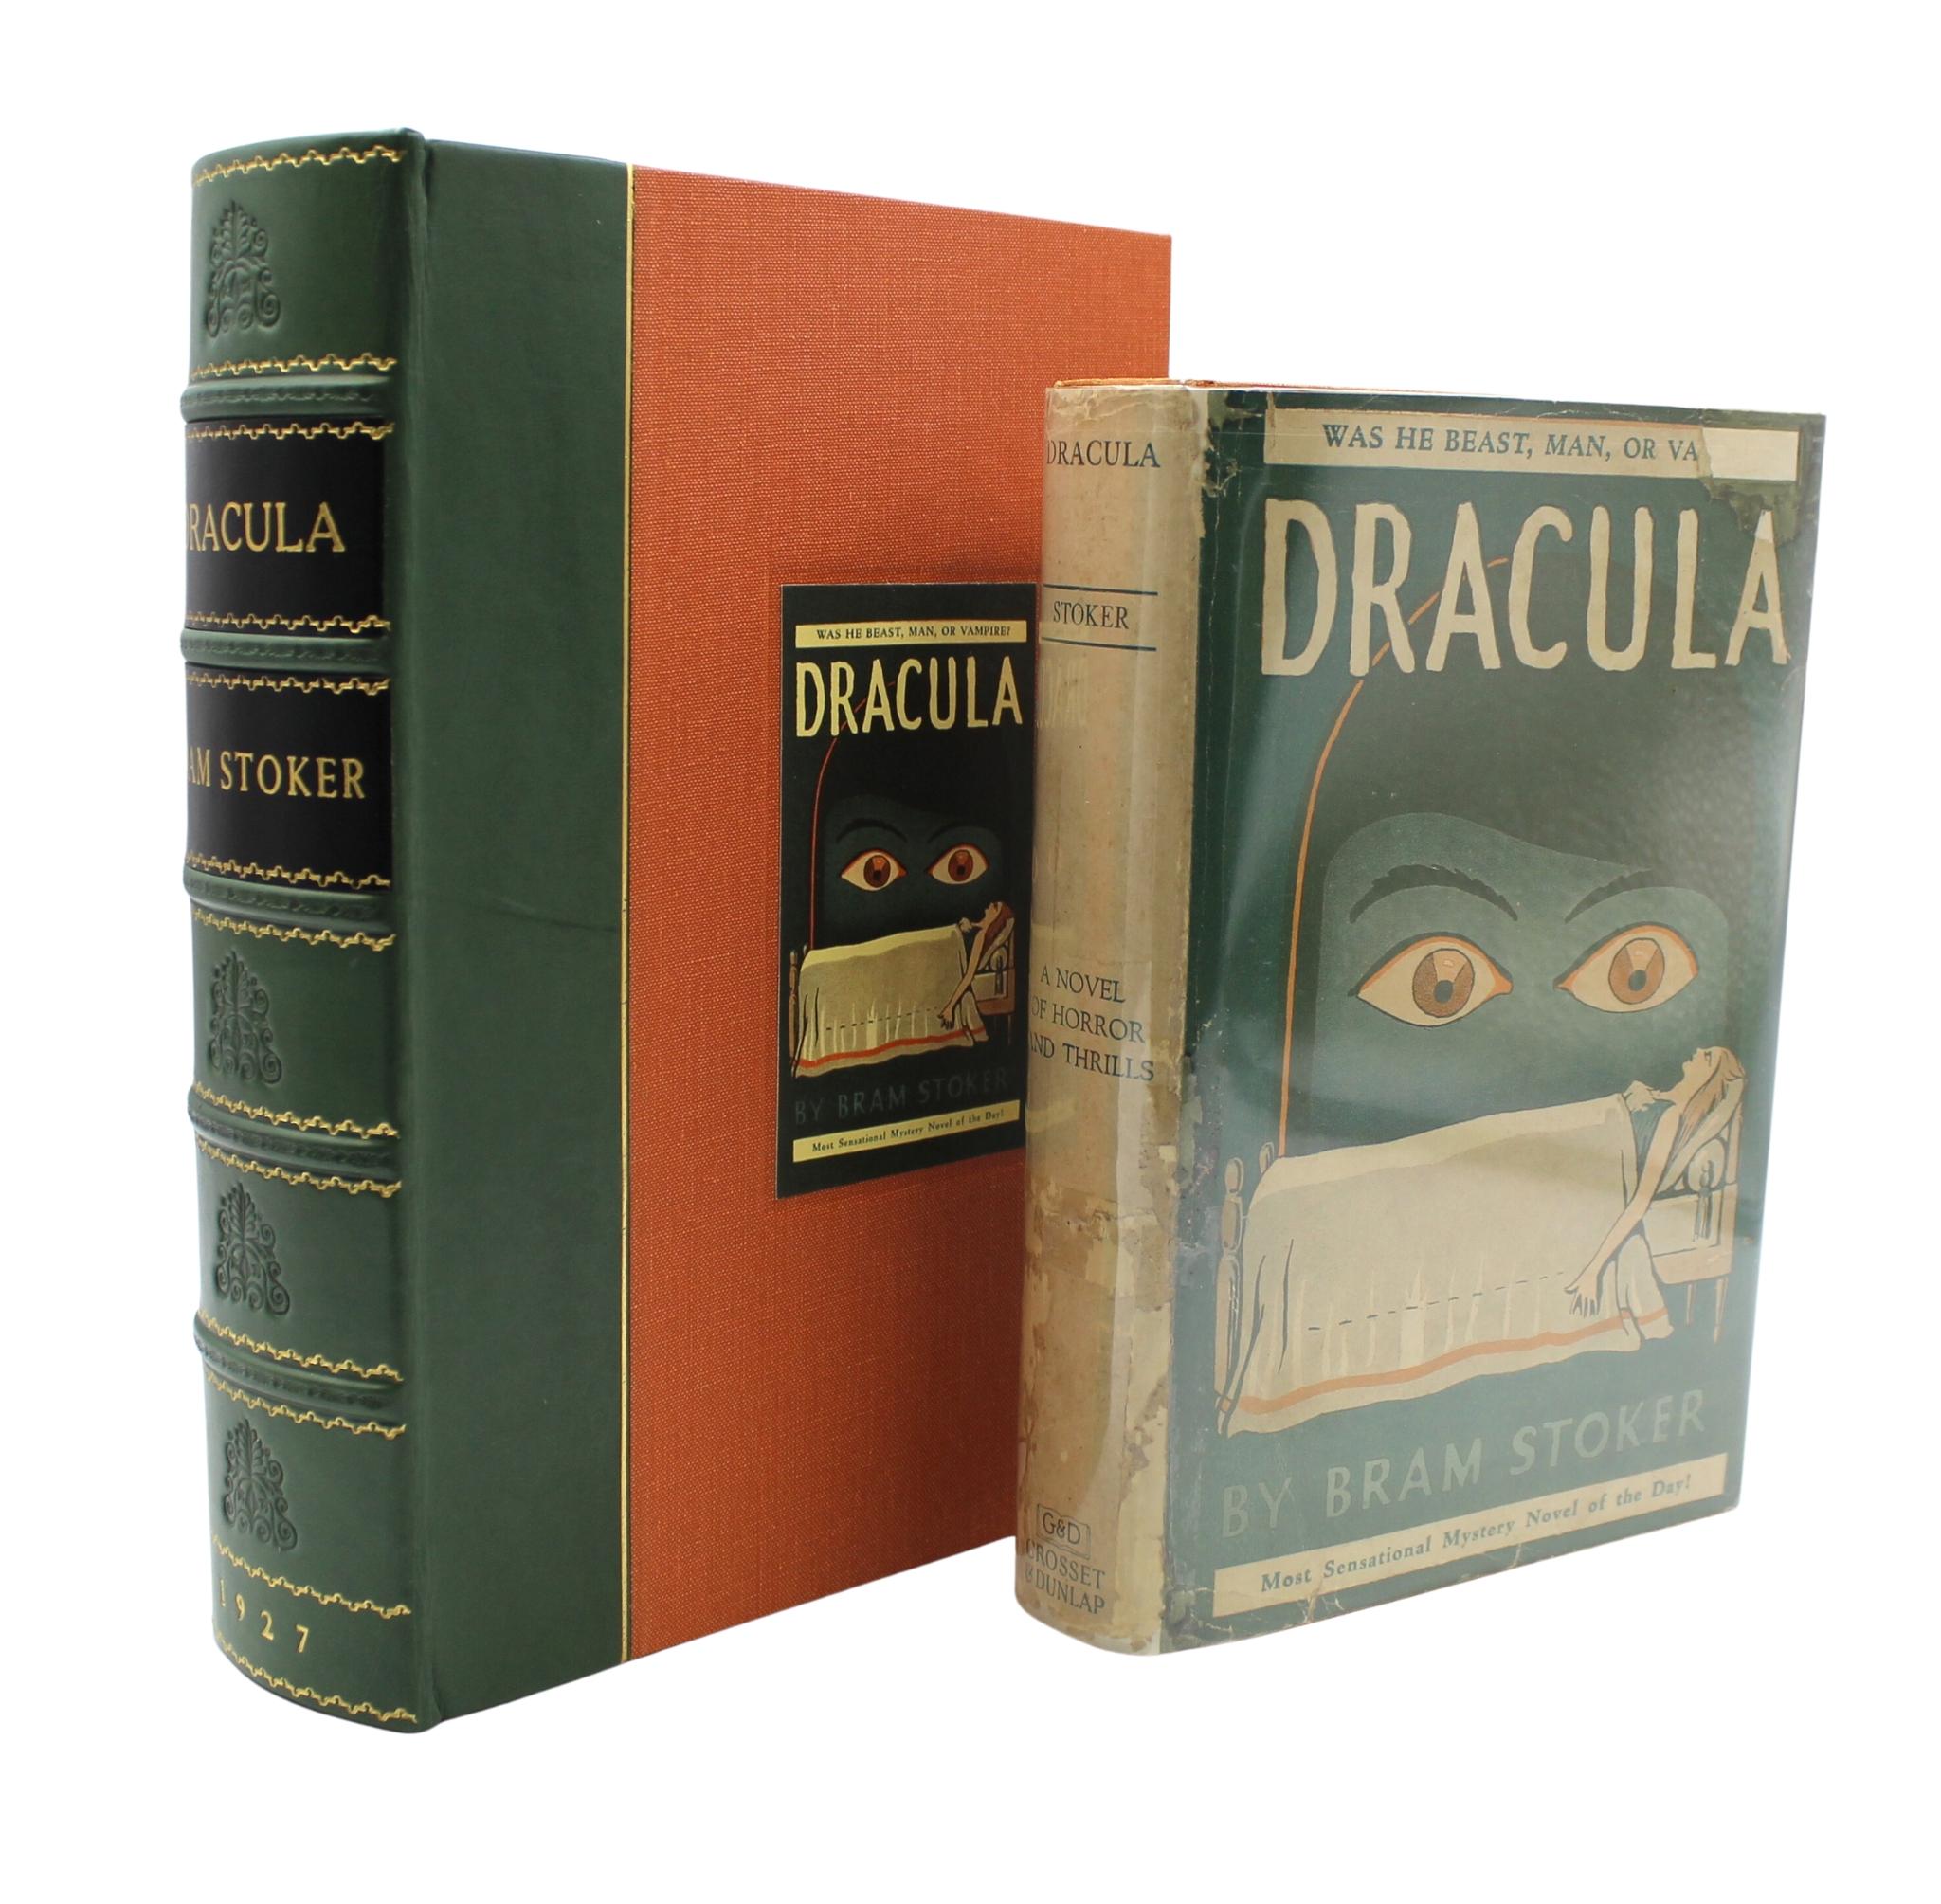 Stroker, Bram. Dracula. New York: Grosset & Dunlap, [1927]. First Grosset & Dunlap Edition. 8ov. Presented in original orange cloth boards, stamped in black, and the original pictorial dust jacket. With a new archival ¼ leather and cloth clamshell